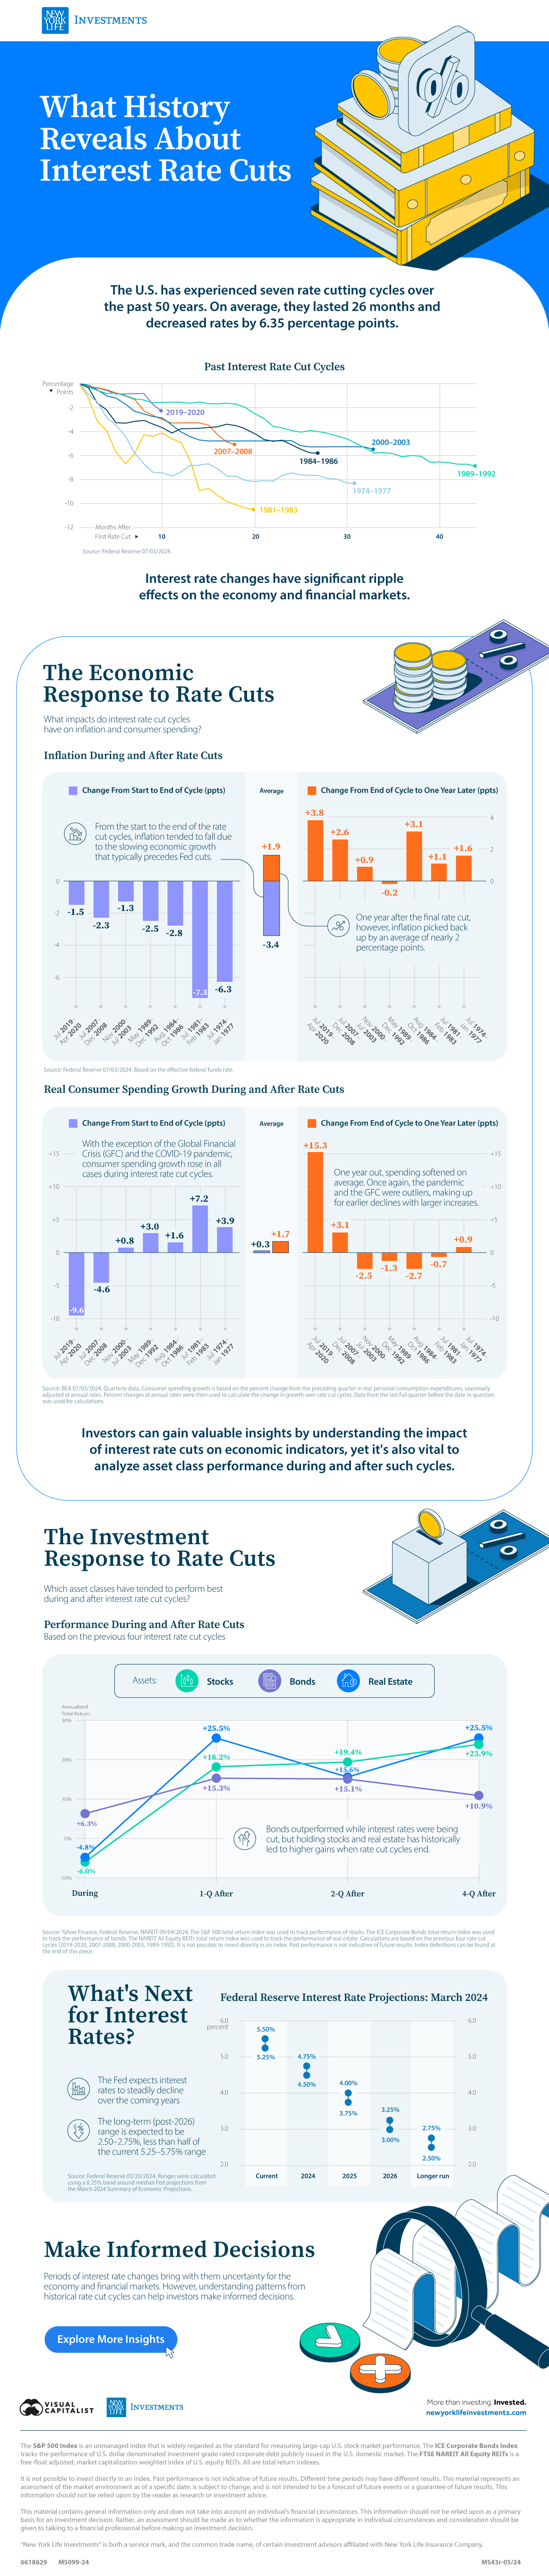 An infographic with line and bar charts on the economic and financial impacts of previous cycles of interest rate cuts in the U.S. Inflation and real consumer spending tended to rise one year after the final rate cut. Bonds performed best during cutting cycles, while stocks and real estate outperformed in the quarters after.